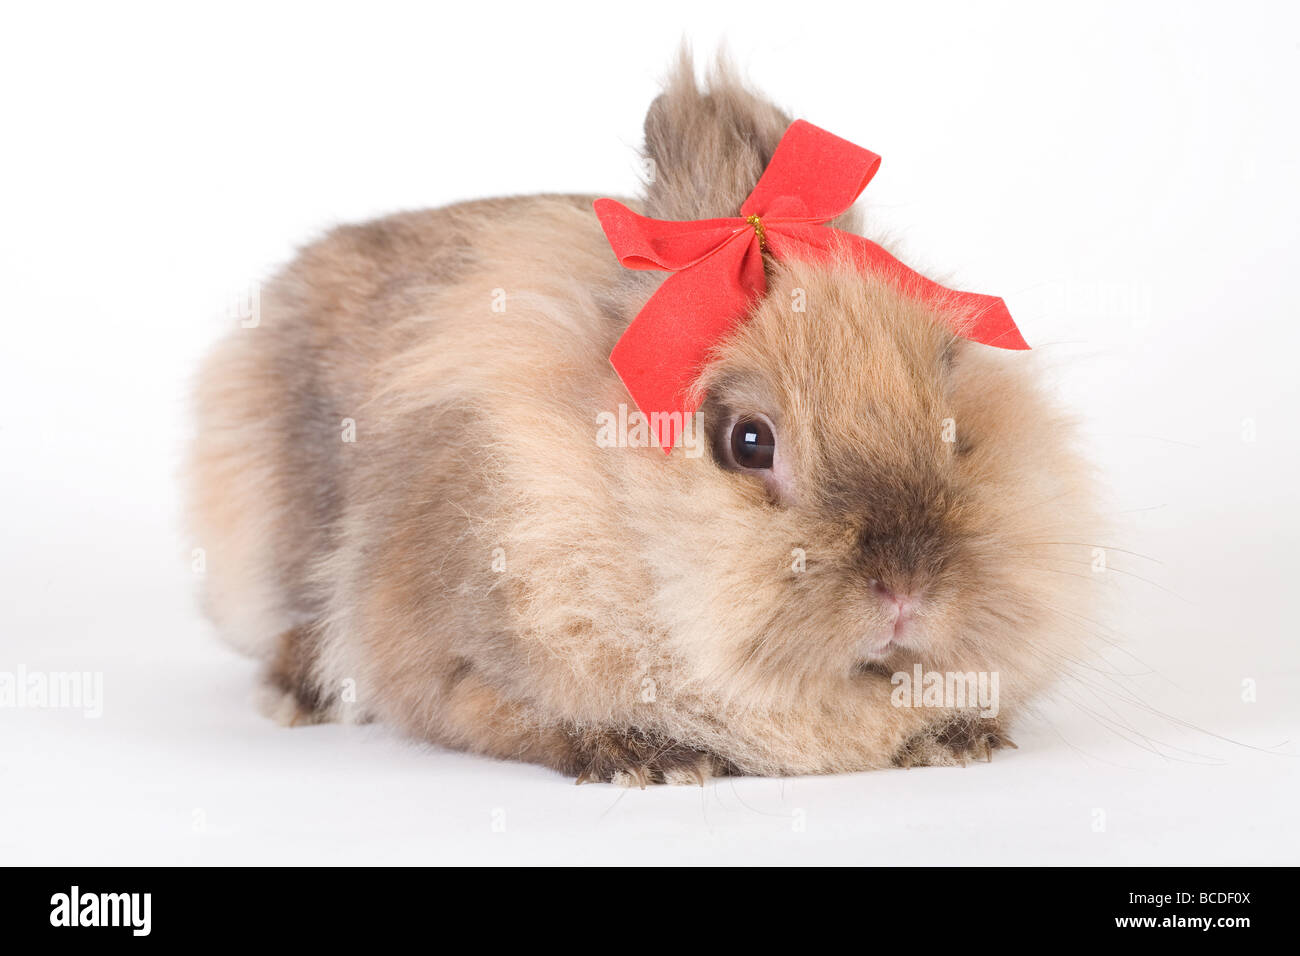 brown bunny with red bow tie isolated on white Stock Photo